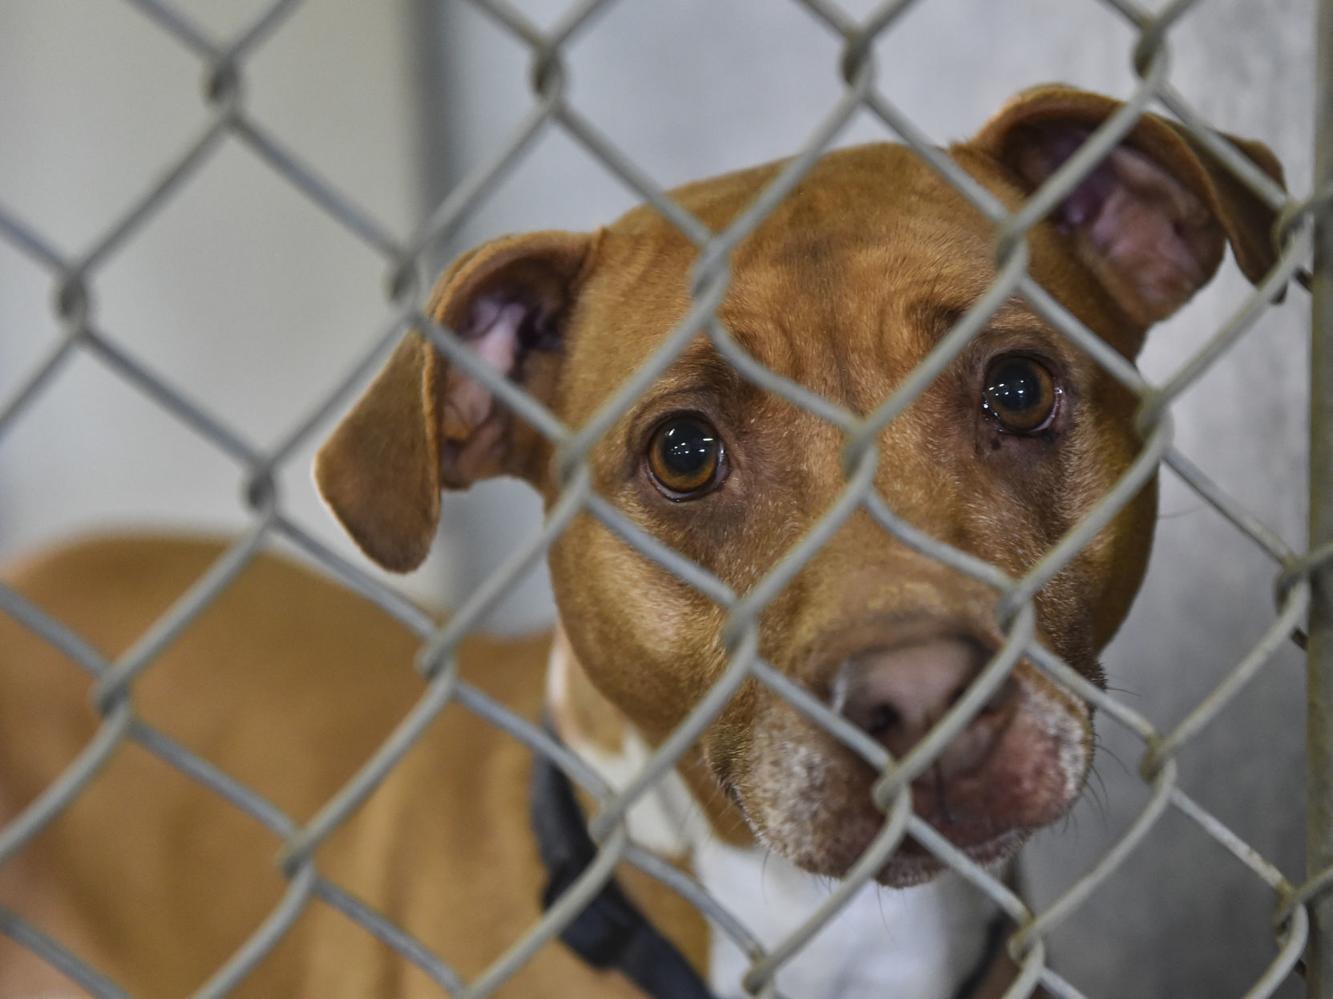 Top Rock Island County Animal Shelter of the decade The ultimate guide 